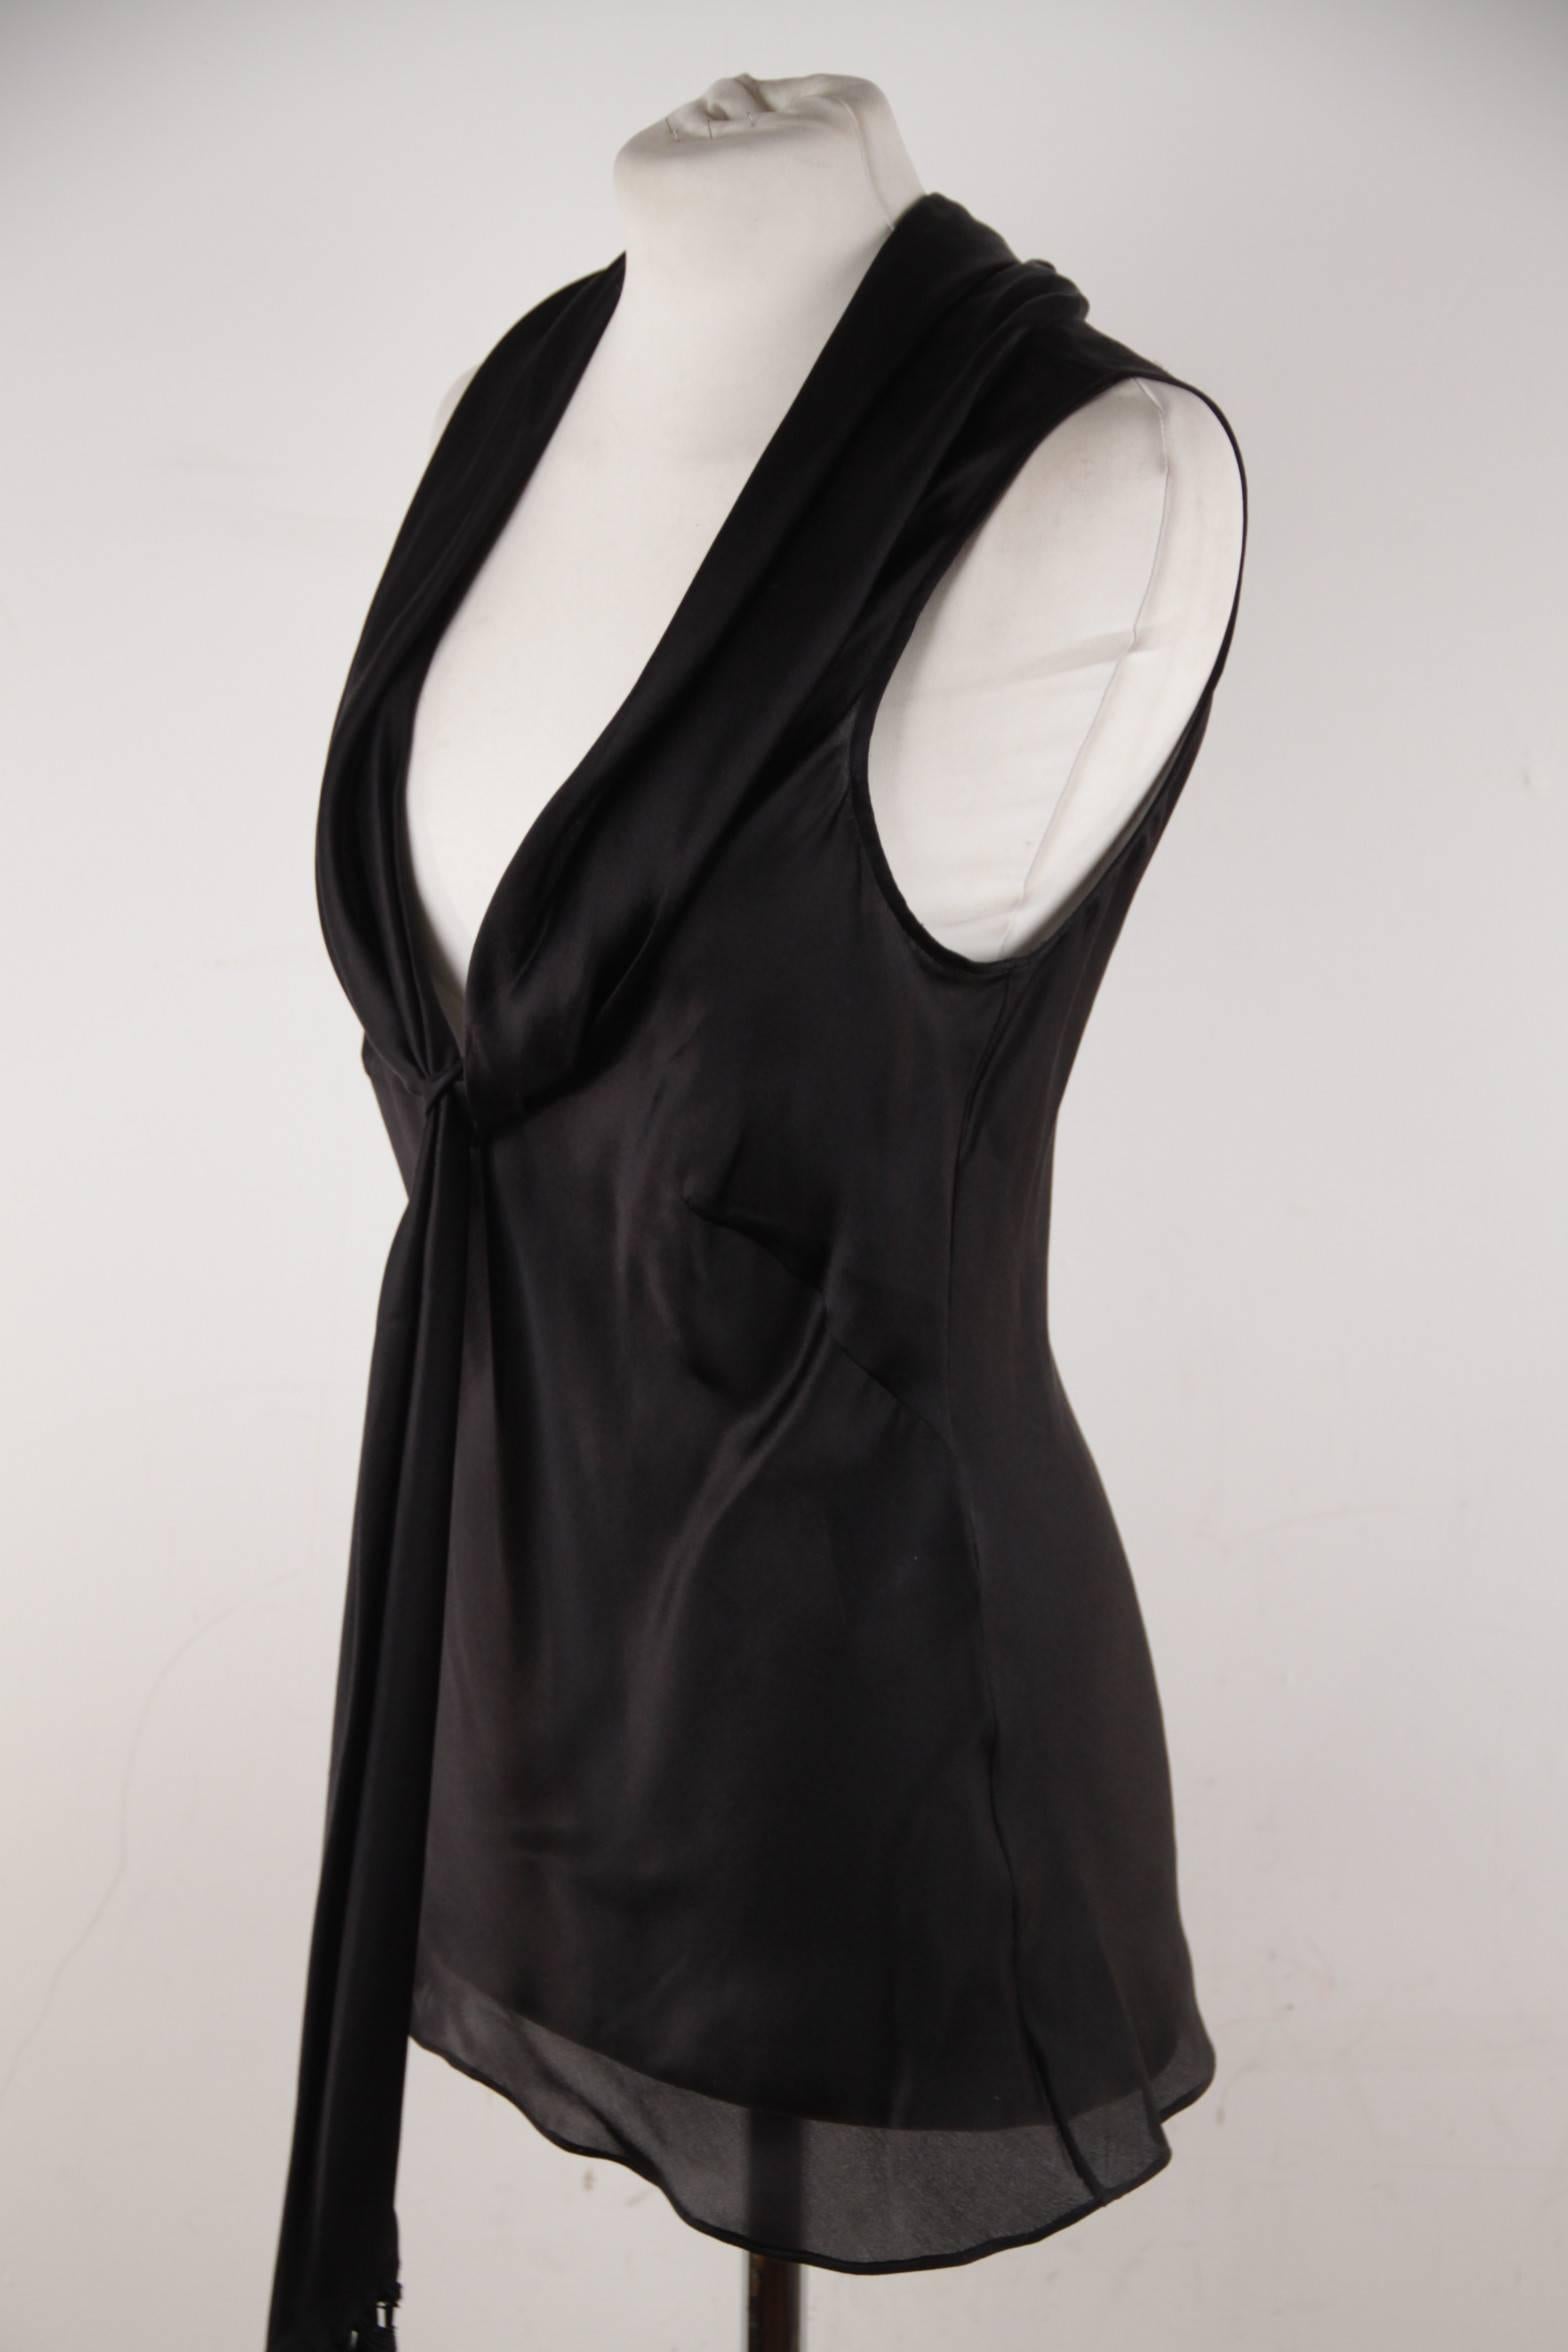 ALEXANDER McQUEEN Black Silk Sleeveless BLOUSE Top w/ TIE NECK Detail 42 IT In Good Condition In Rome, Rome